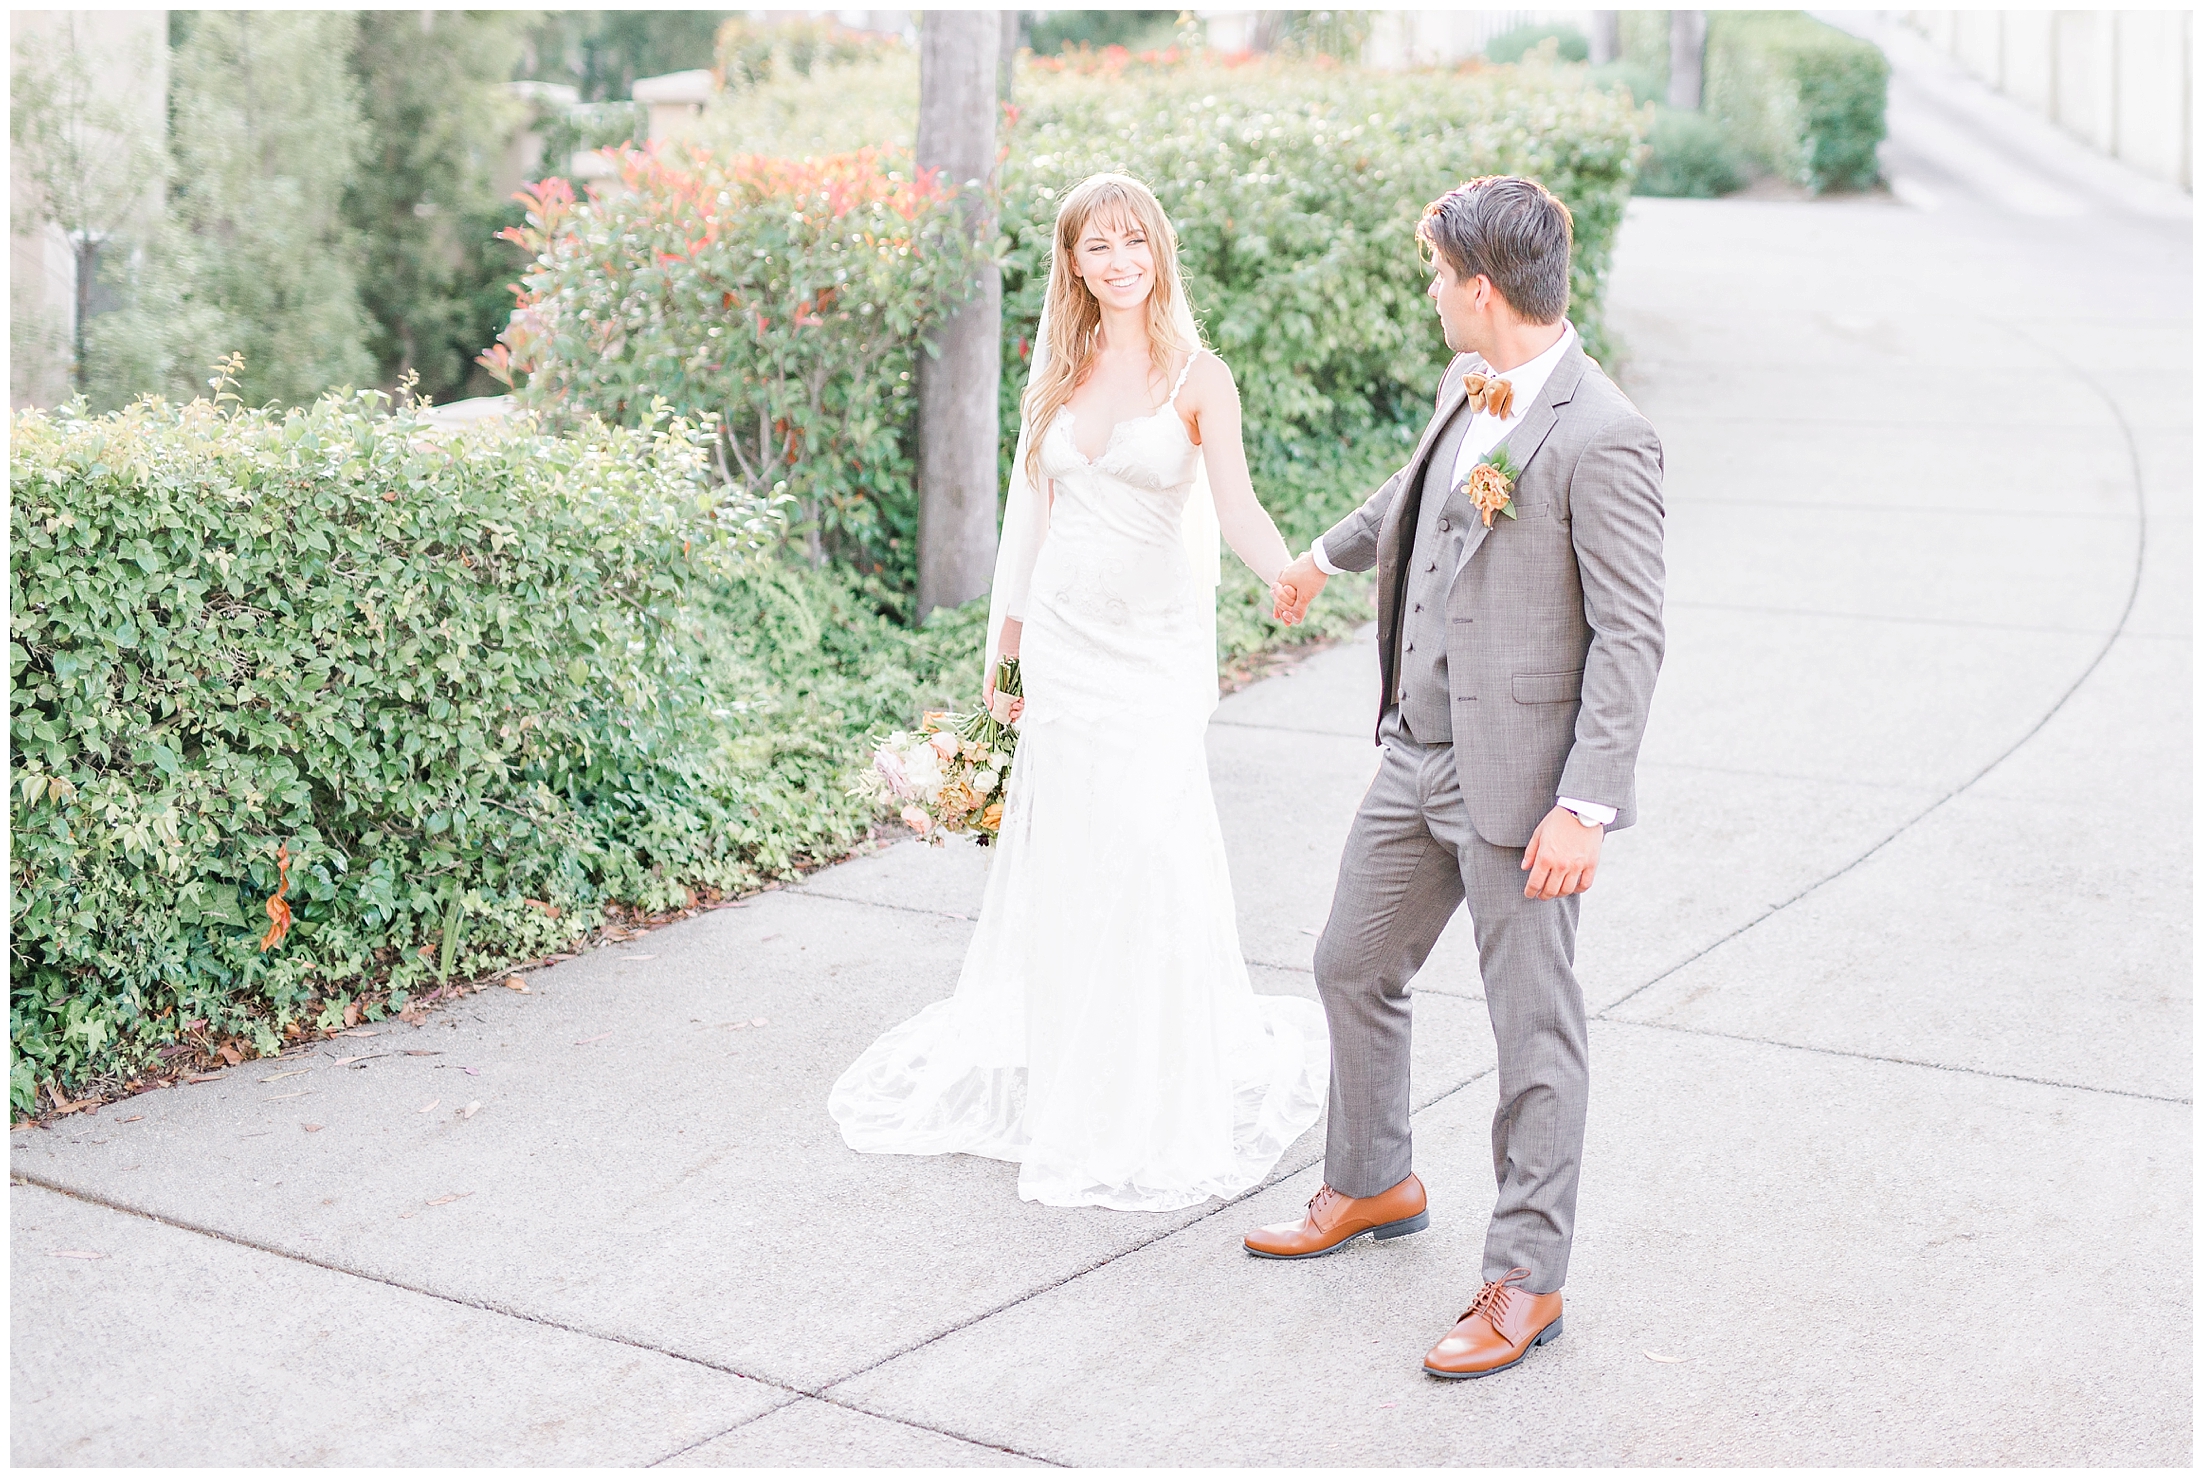 Light and Airy Wedding at Marbella Country Club in Southern Orange County, California